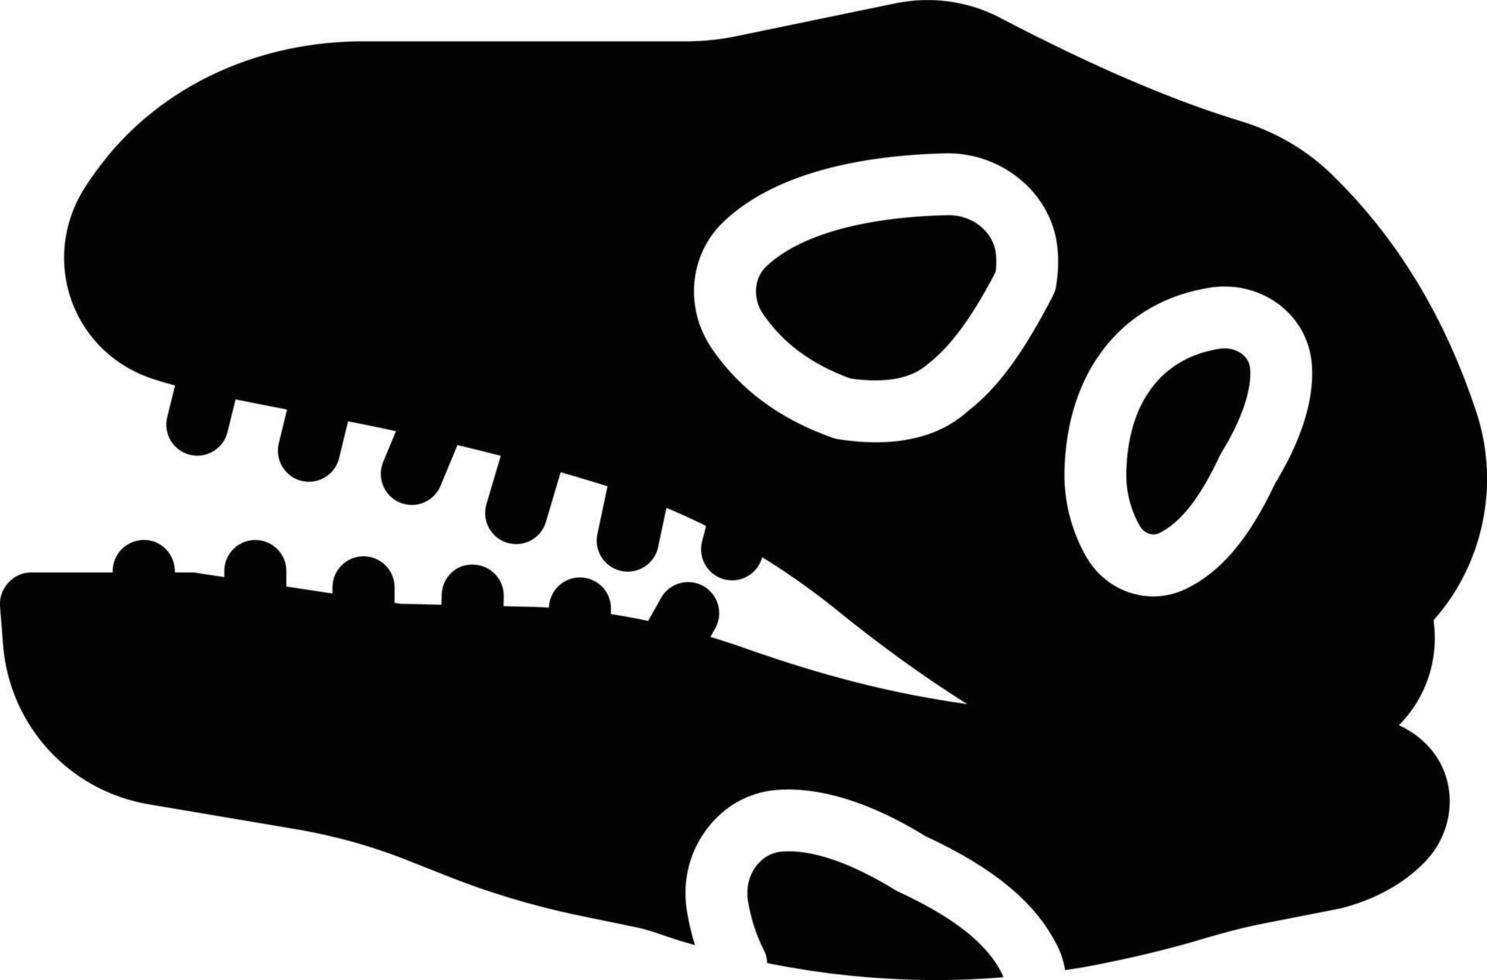 dinosaur skull vector illustration on a background.Premium quality symbols.vector icons for concept and graphic design.